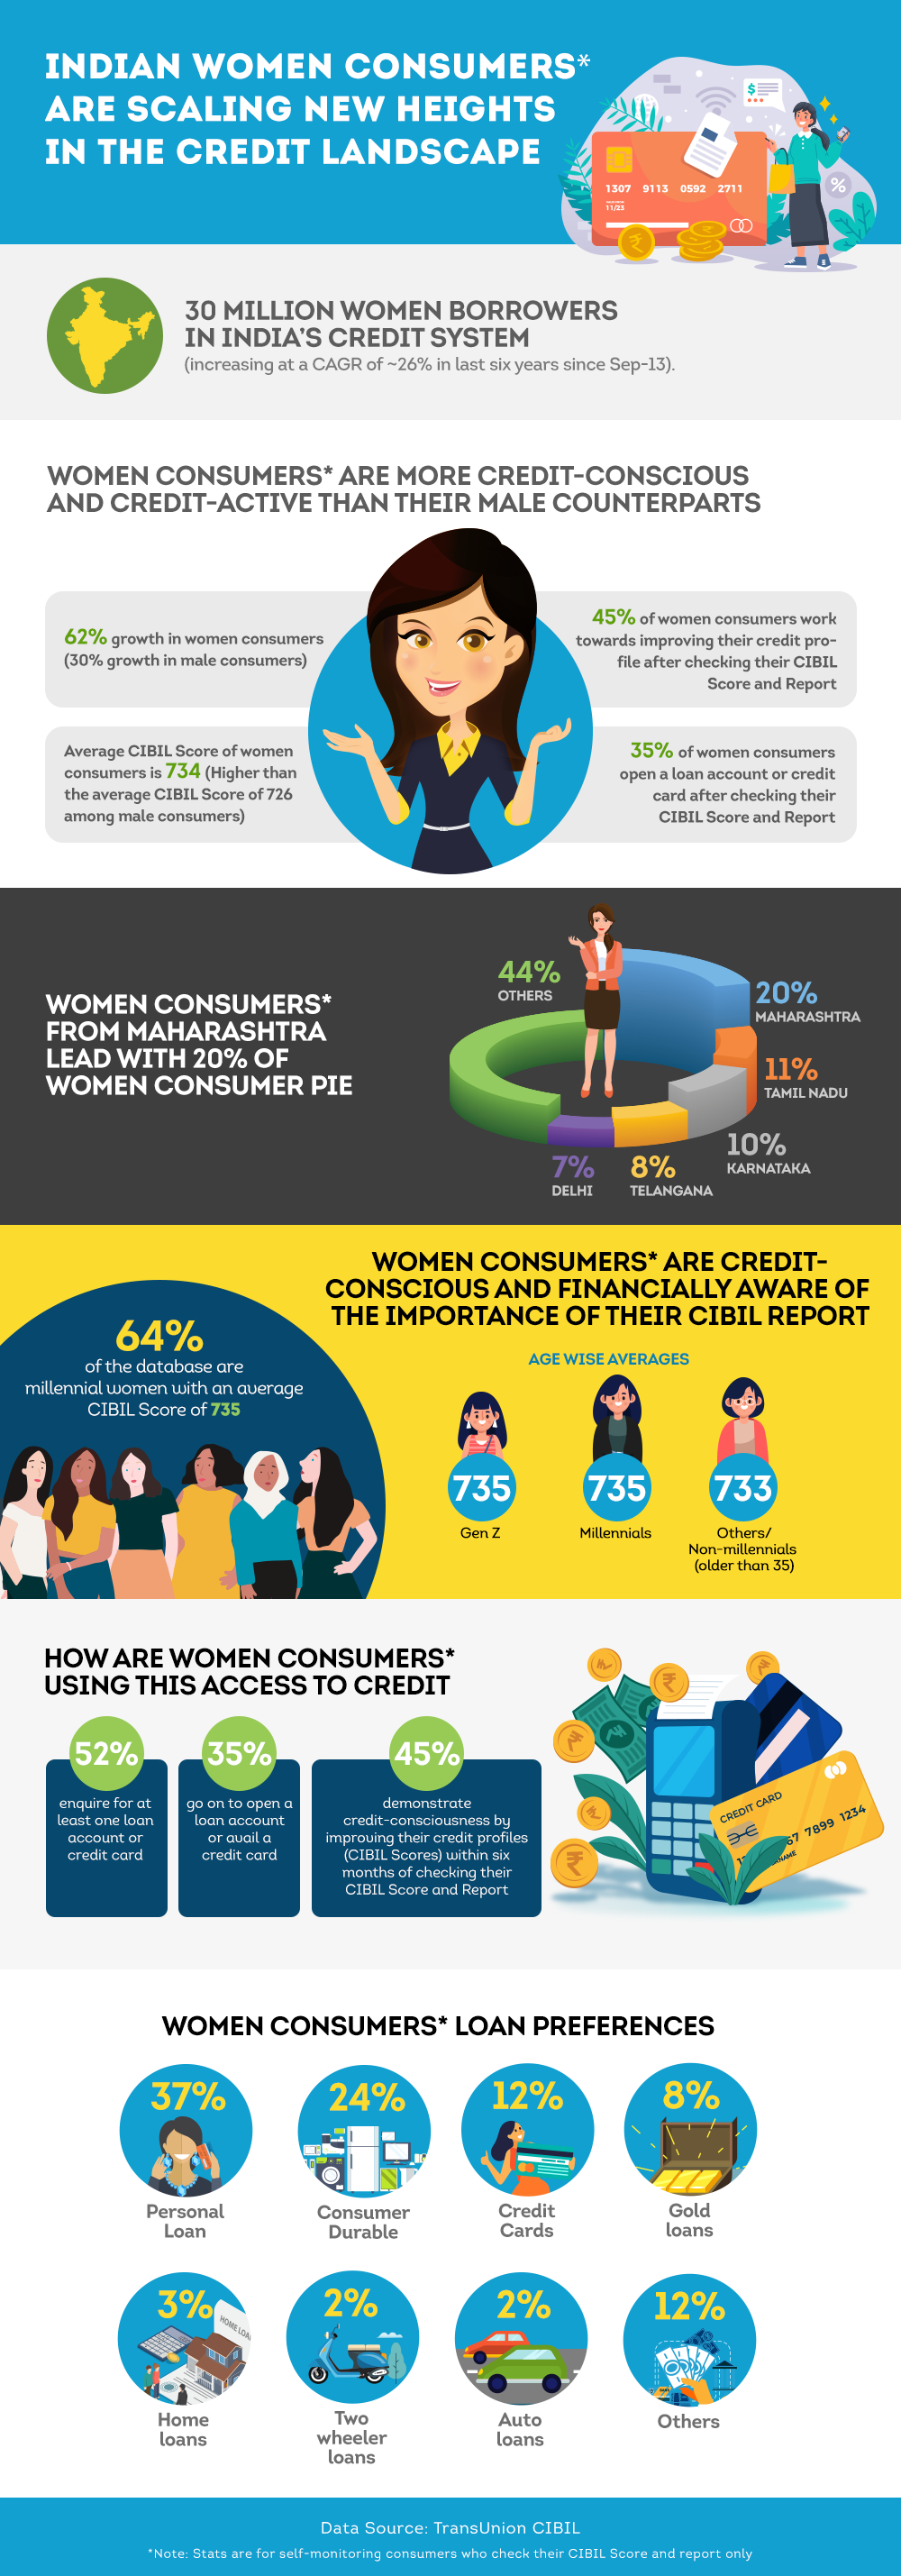 Increased Credit-consciousness and Credit activity among Indian Women Consumers